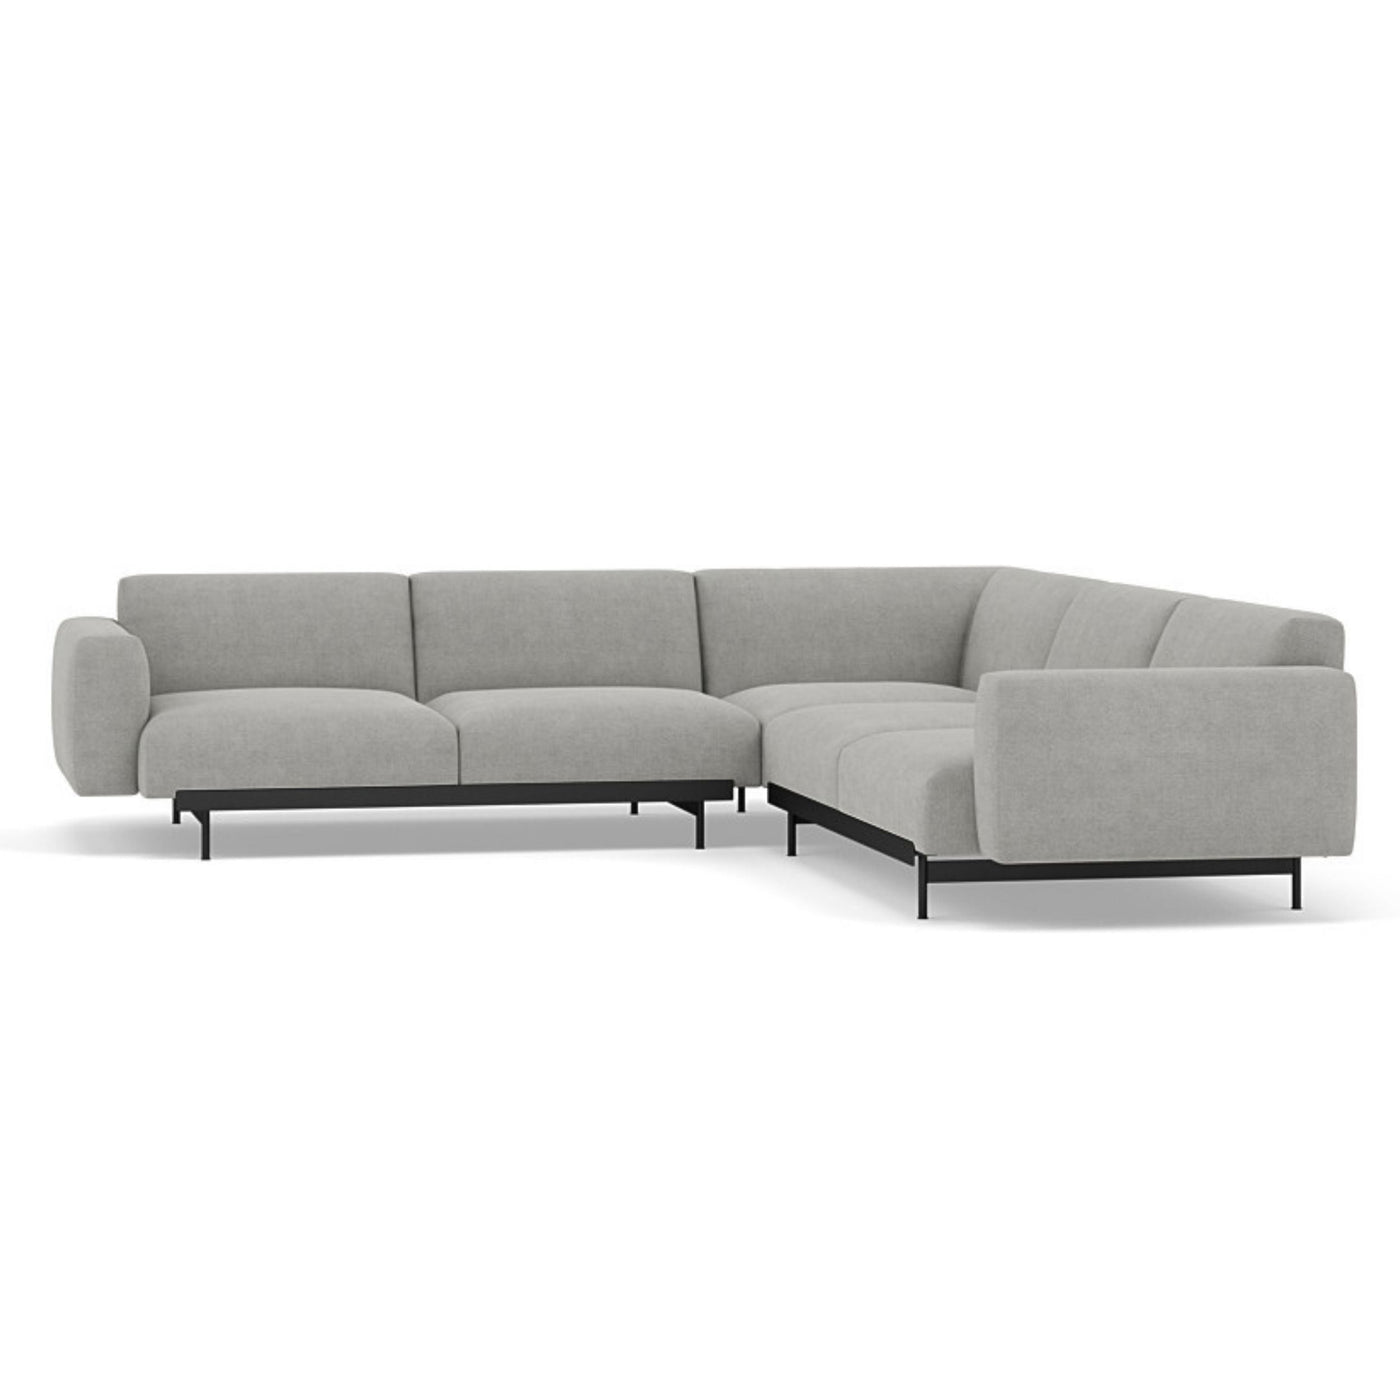 Muuto In Situ corner sofa, configuration 1. Made to order from someday designs. #colour_fiord-151